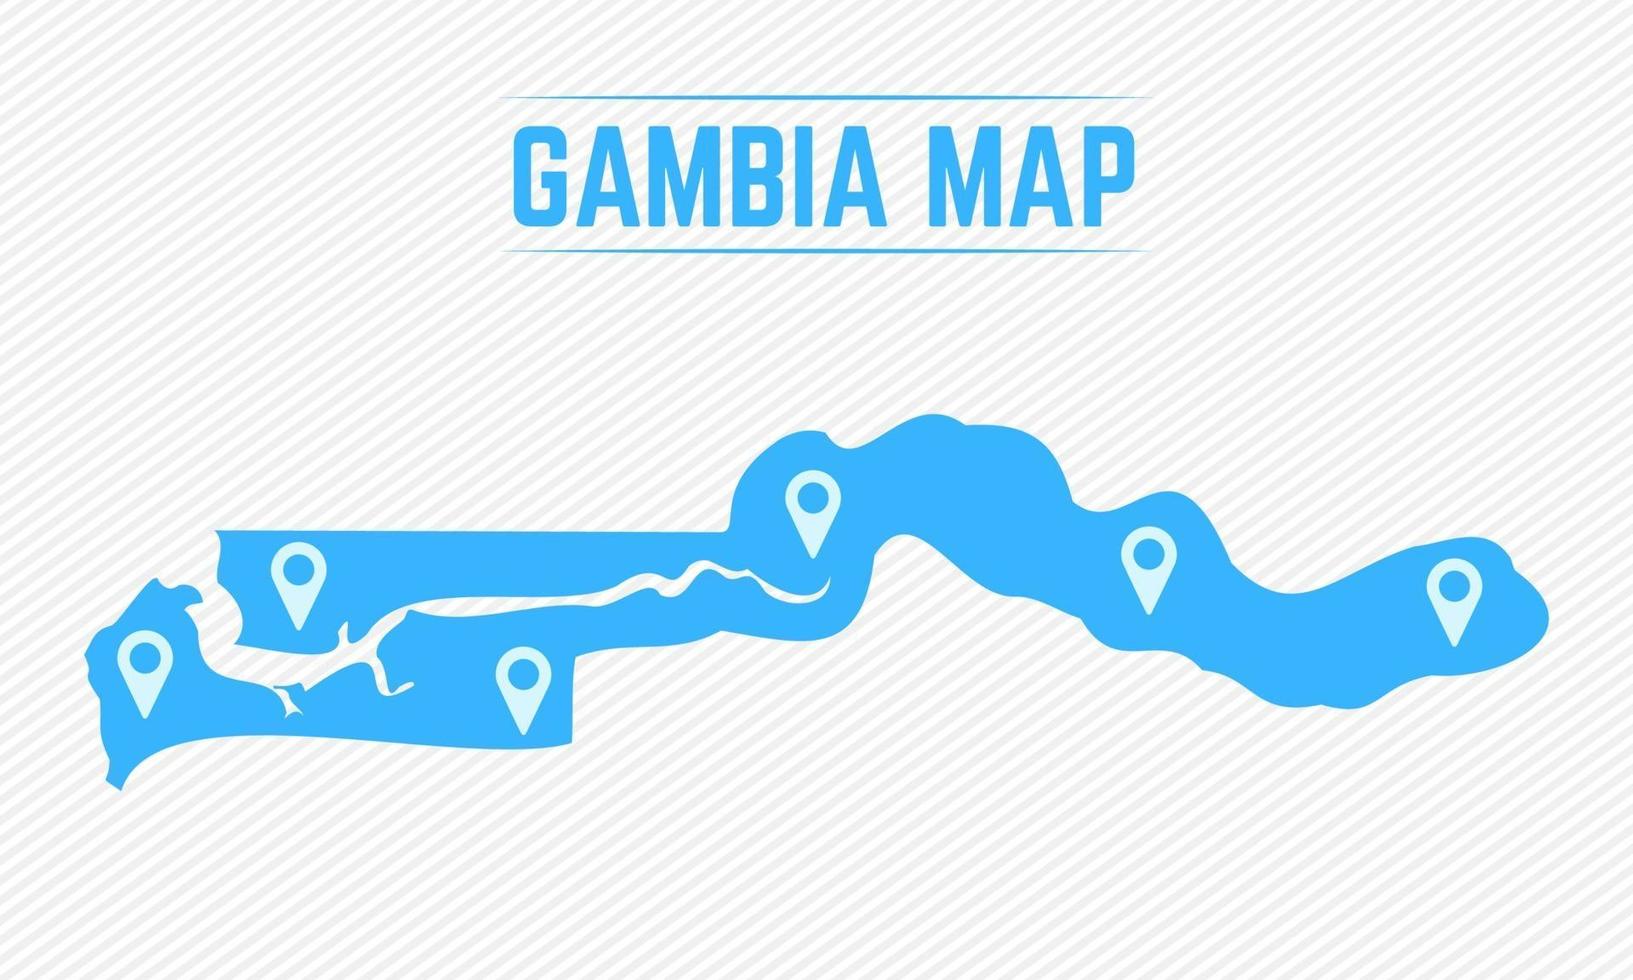 Gambia Simple Map With Map Icons vector